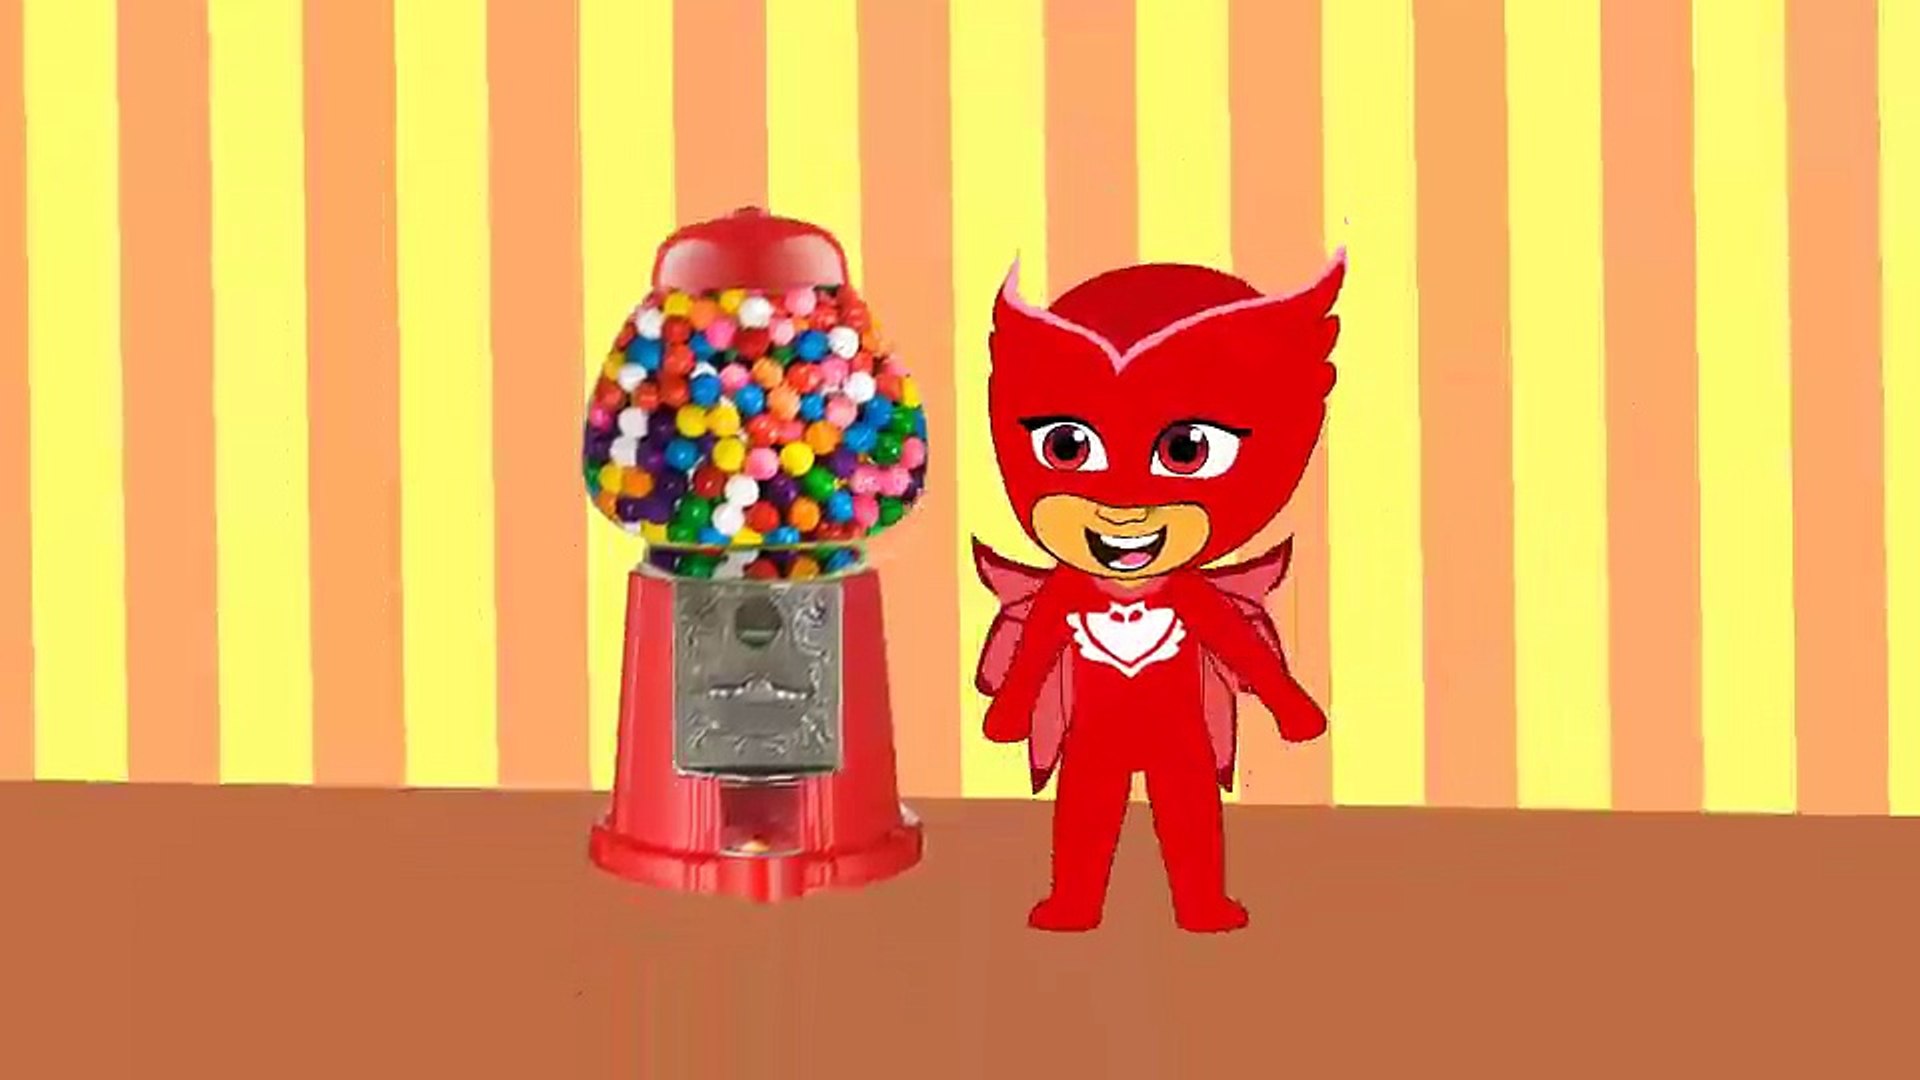 Pj Masks Disney Junior Full Episodes Gekko And Catboy Blows Gum Compilation Nursery Rhymes Funny Story Song For Kids Video Dailymotion